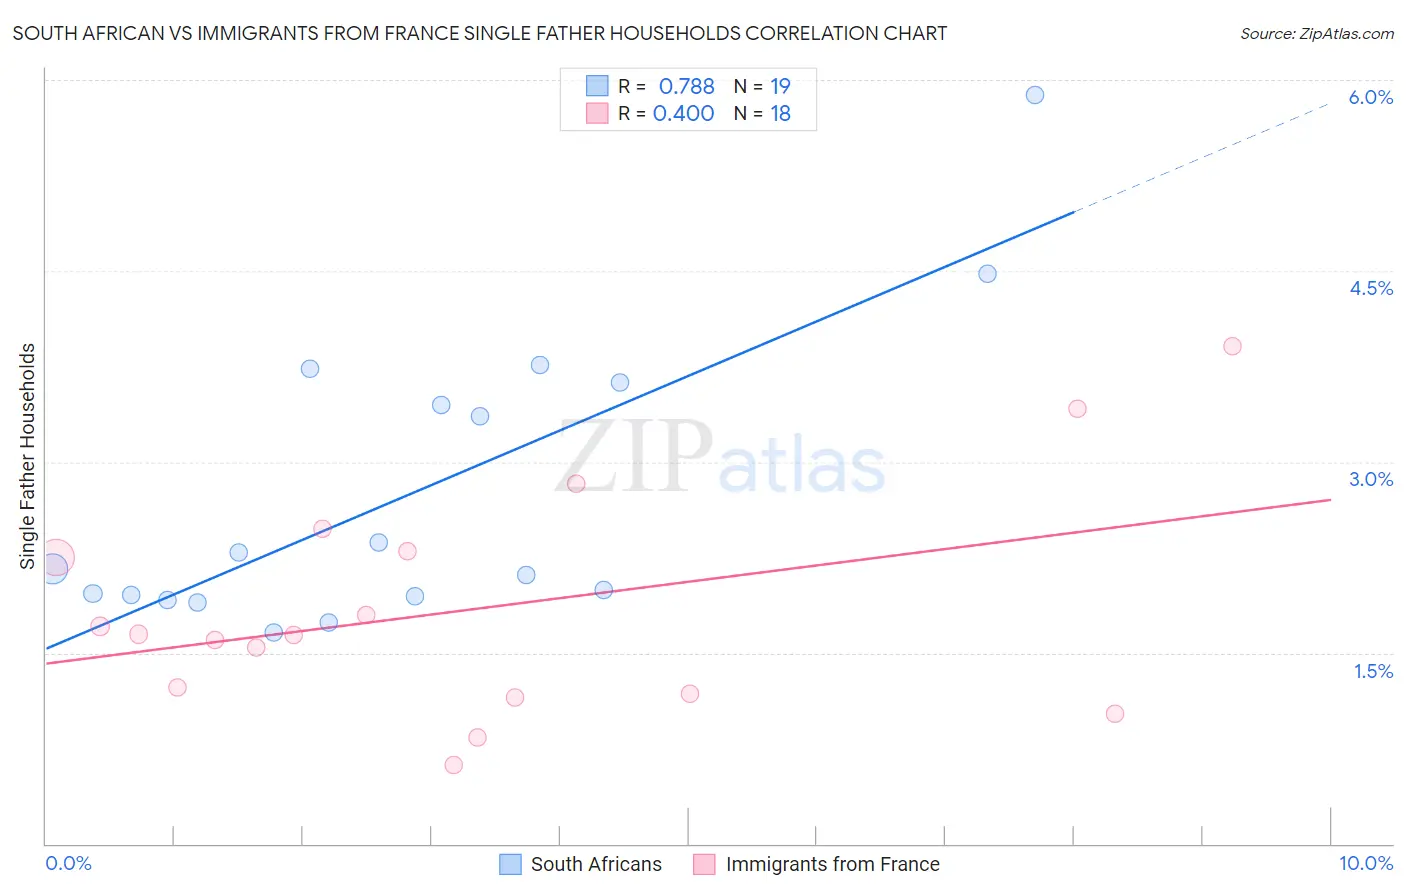 South African vs Immigrants from France Single Father Households